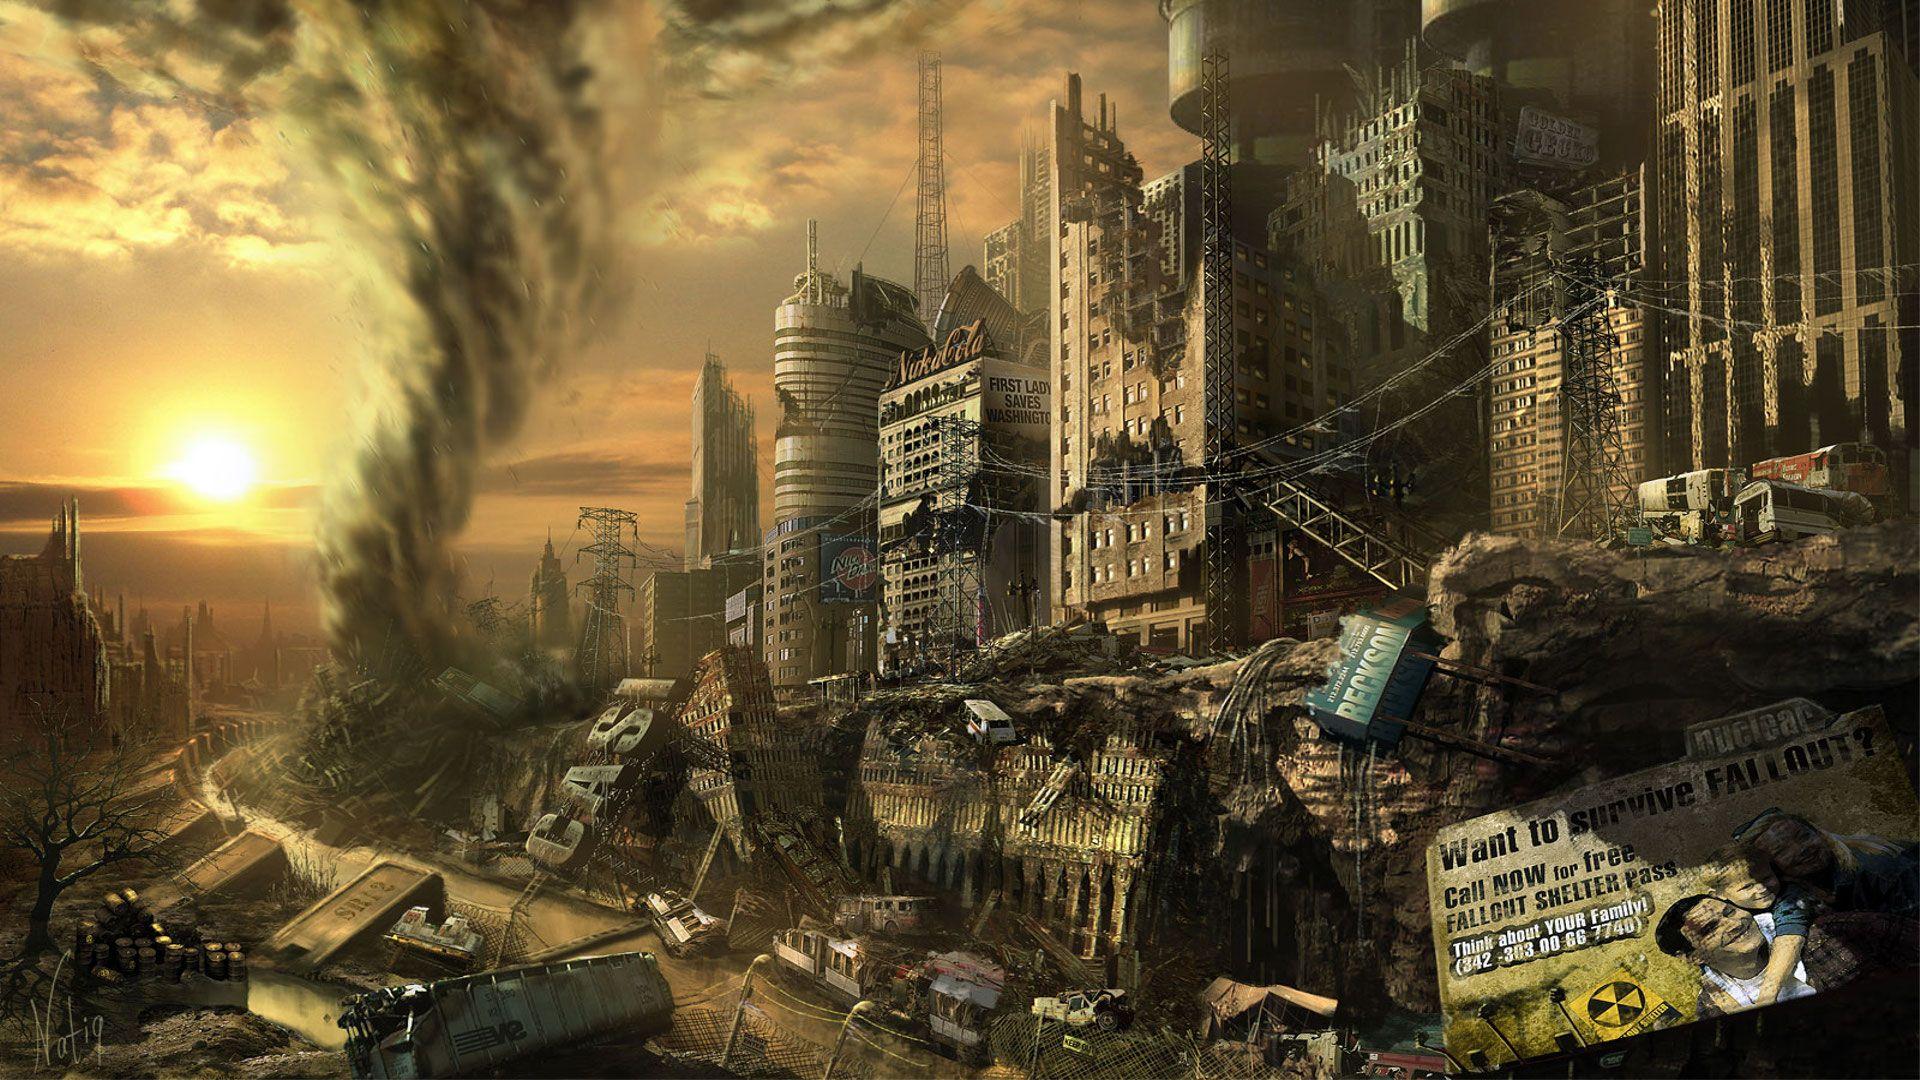 Fallout Pc Wallpapers Top Free Fallout Pc Backgrounds Wallpaperaccess